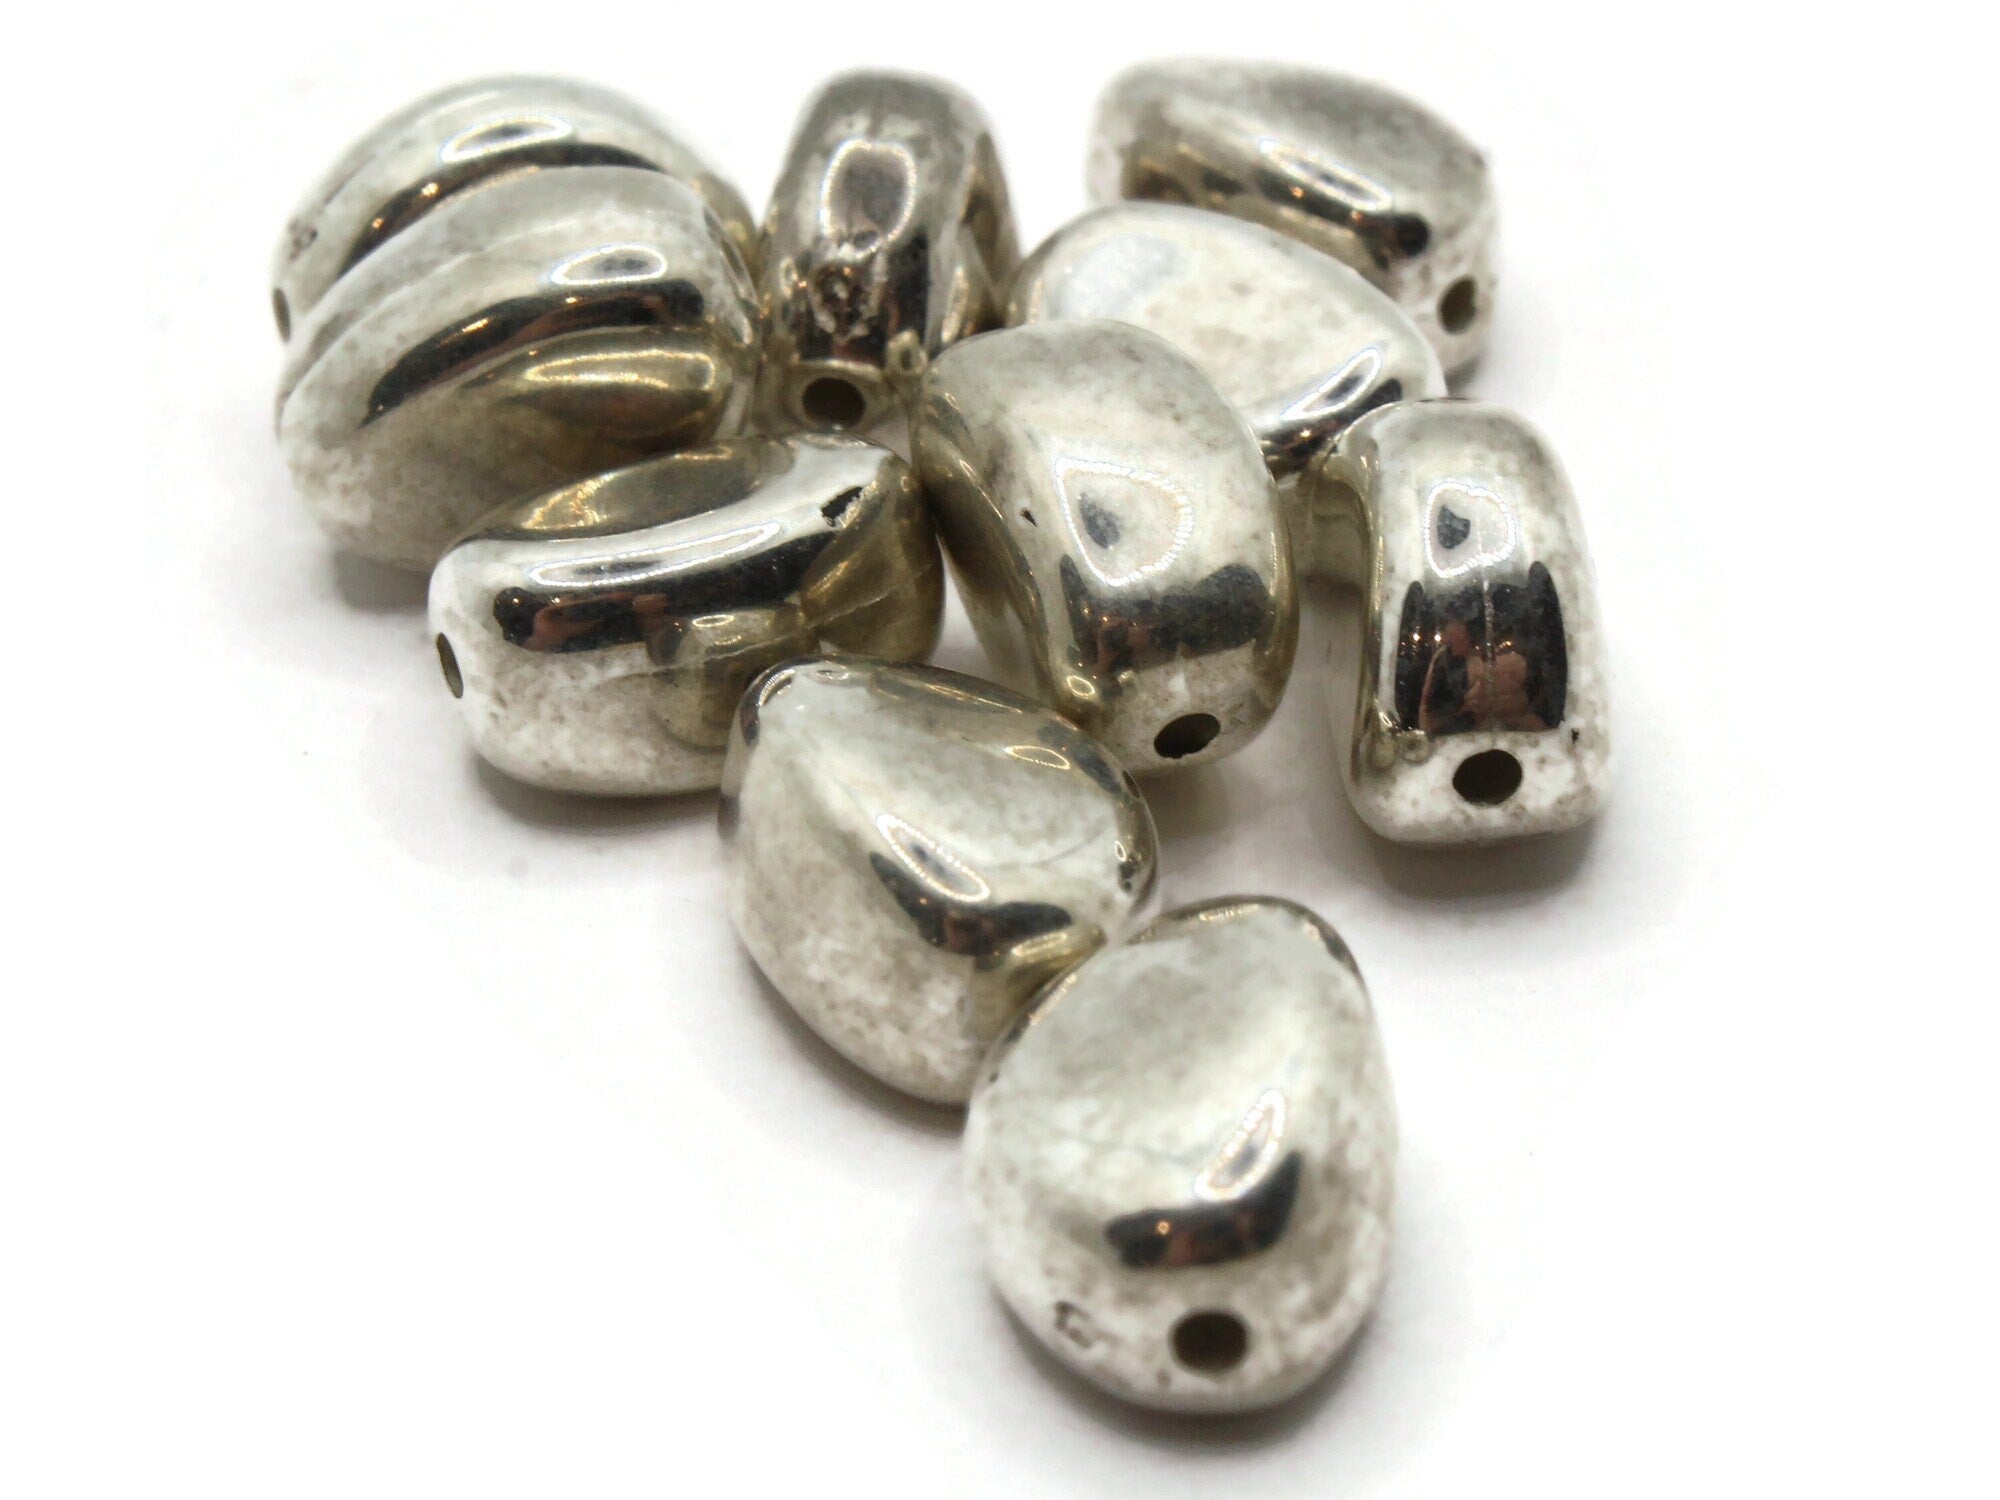 2 Large Silver Beads Spacers Metal Jewelry Making Supplies Antique Focal  Beads 